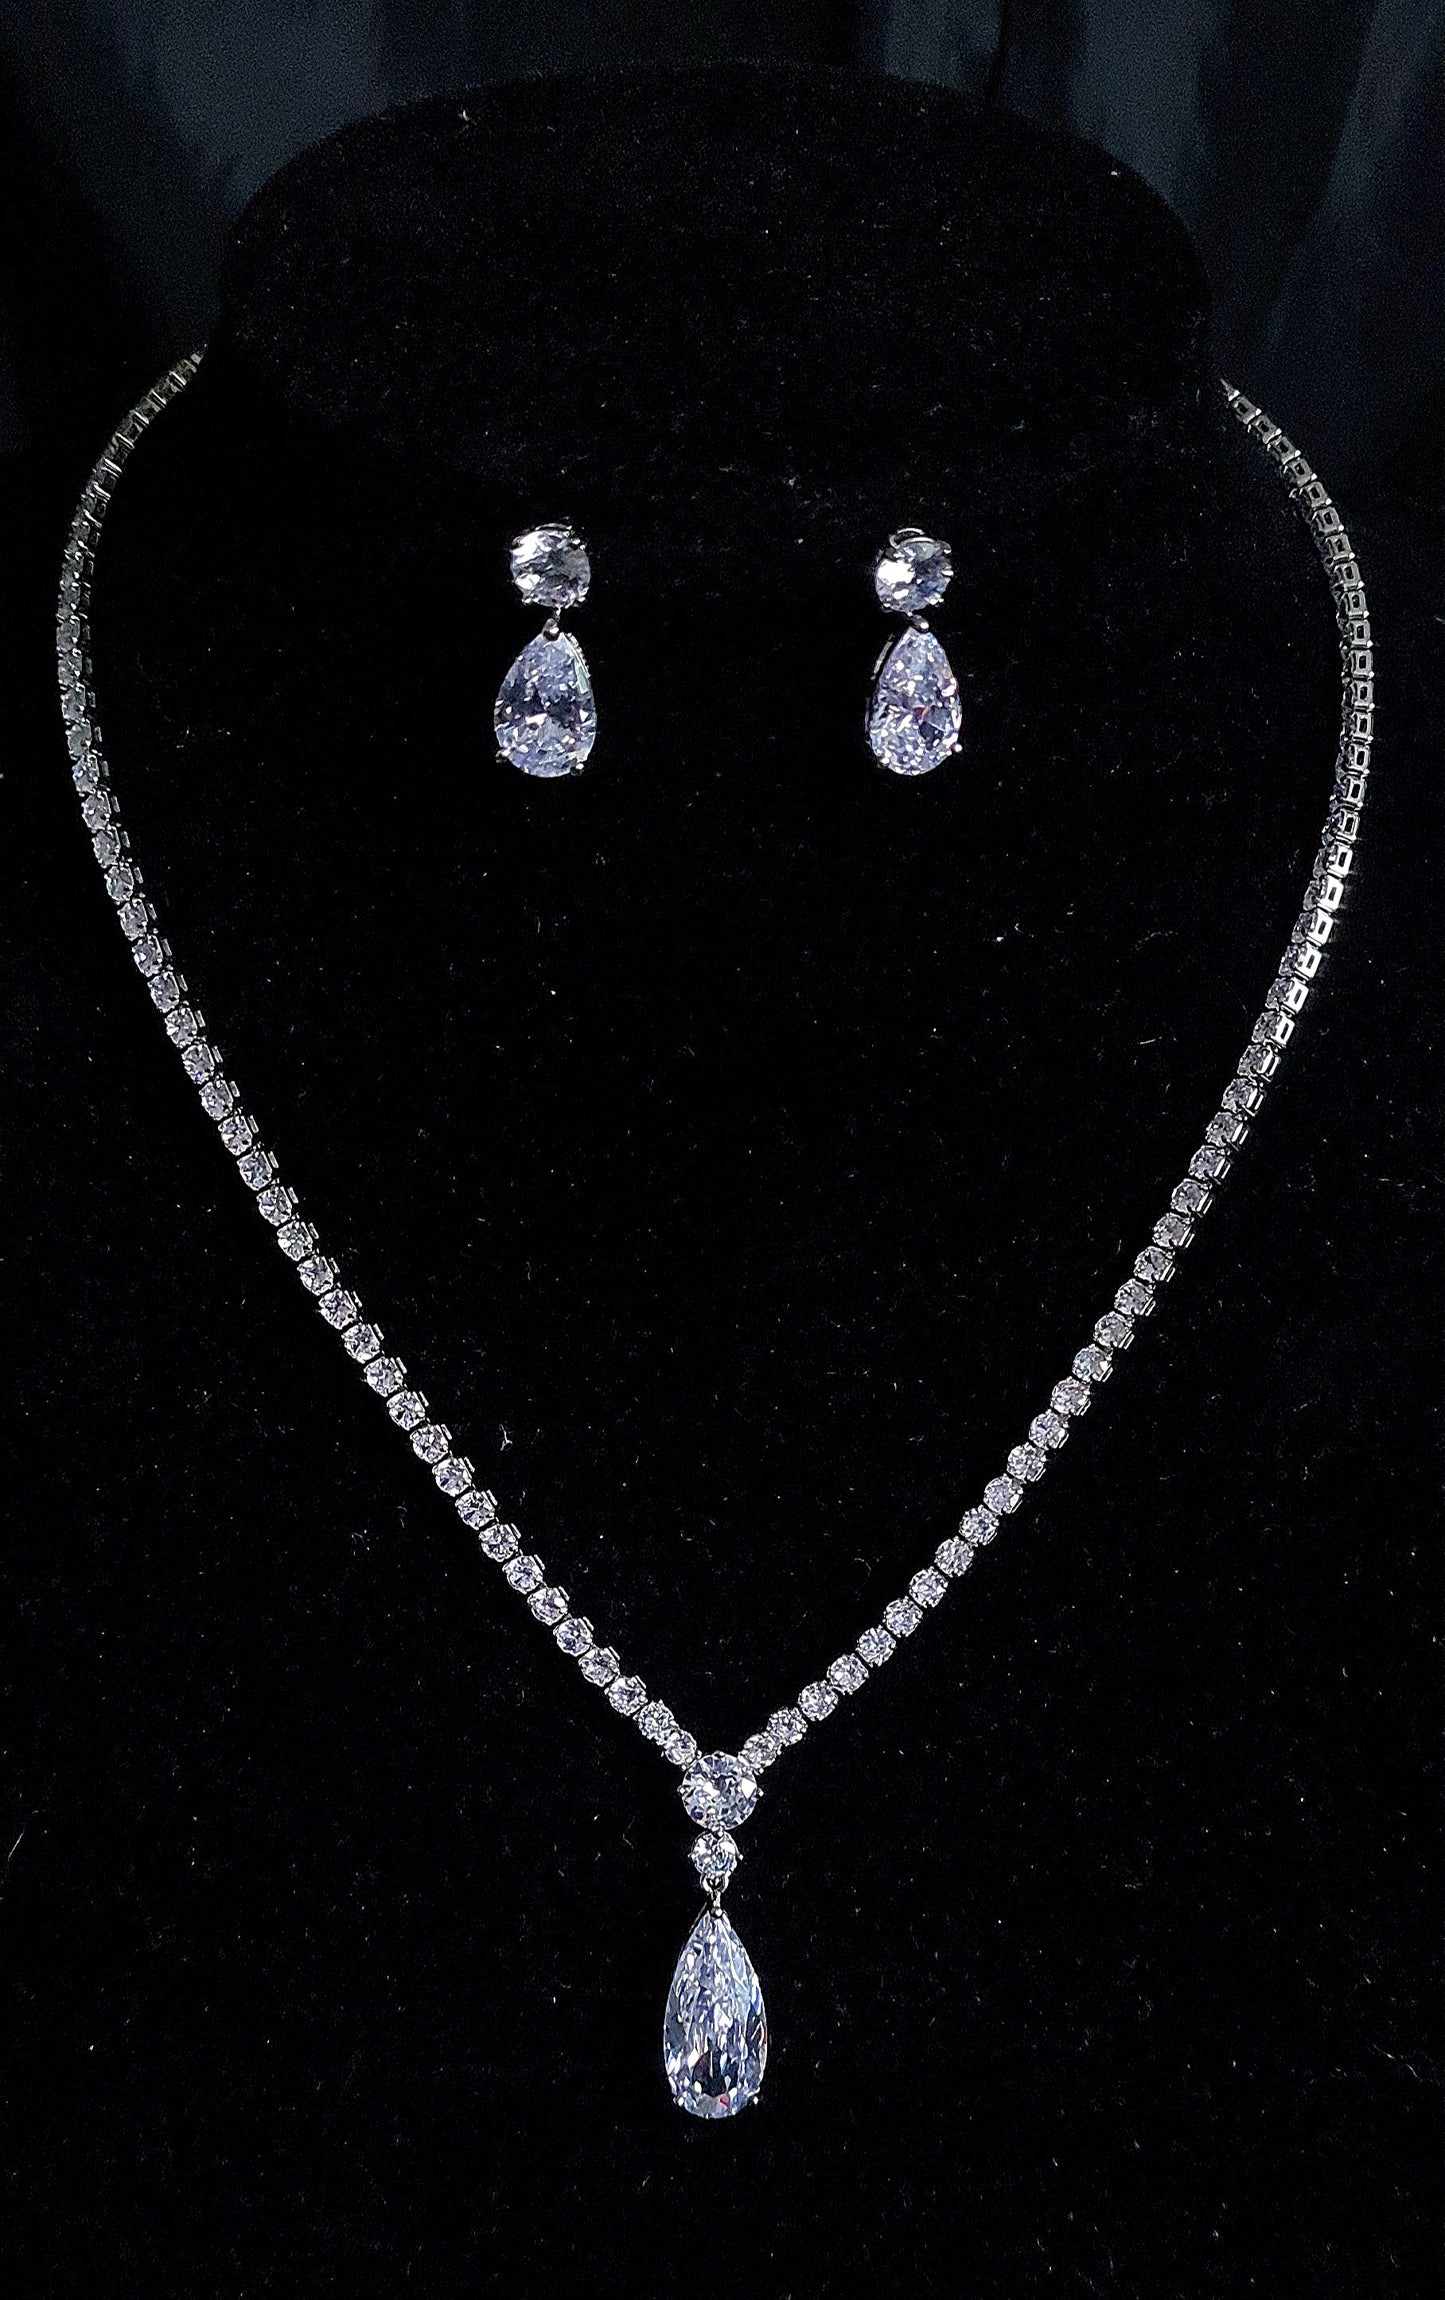 A set of sparkling necklace and earrings on a black surface. The necklace is long and flowing with a delicate design. It is made of silver with sparkling cubic zirconia crystals. The earrings are matching teardrop shapes with a similar design. The necklace and earrings are displayed on a black surface. The background is also black.